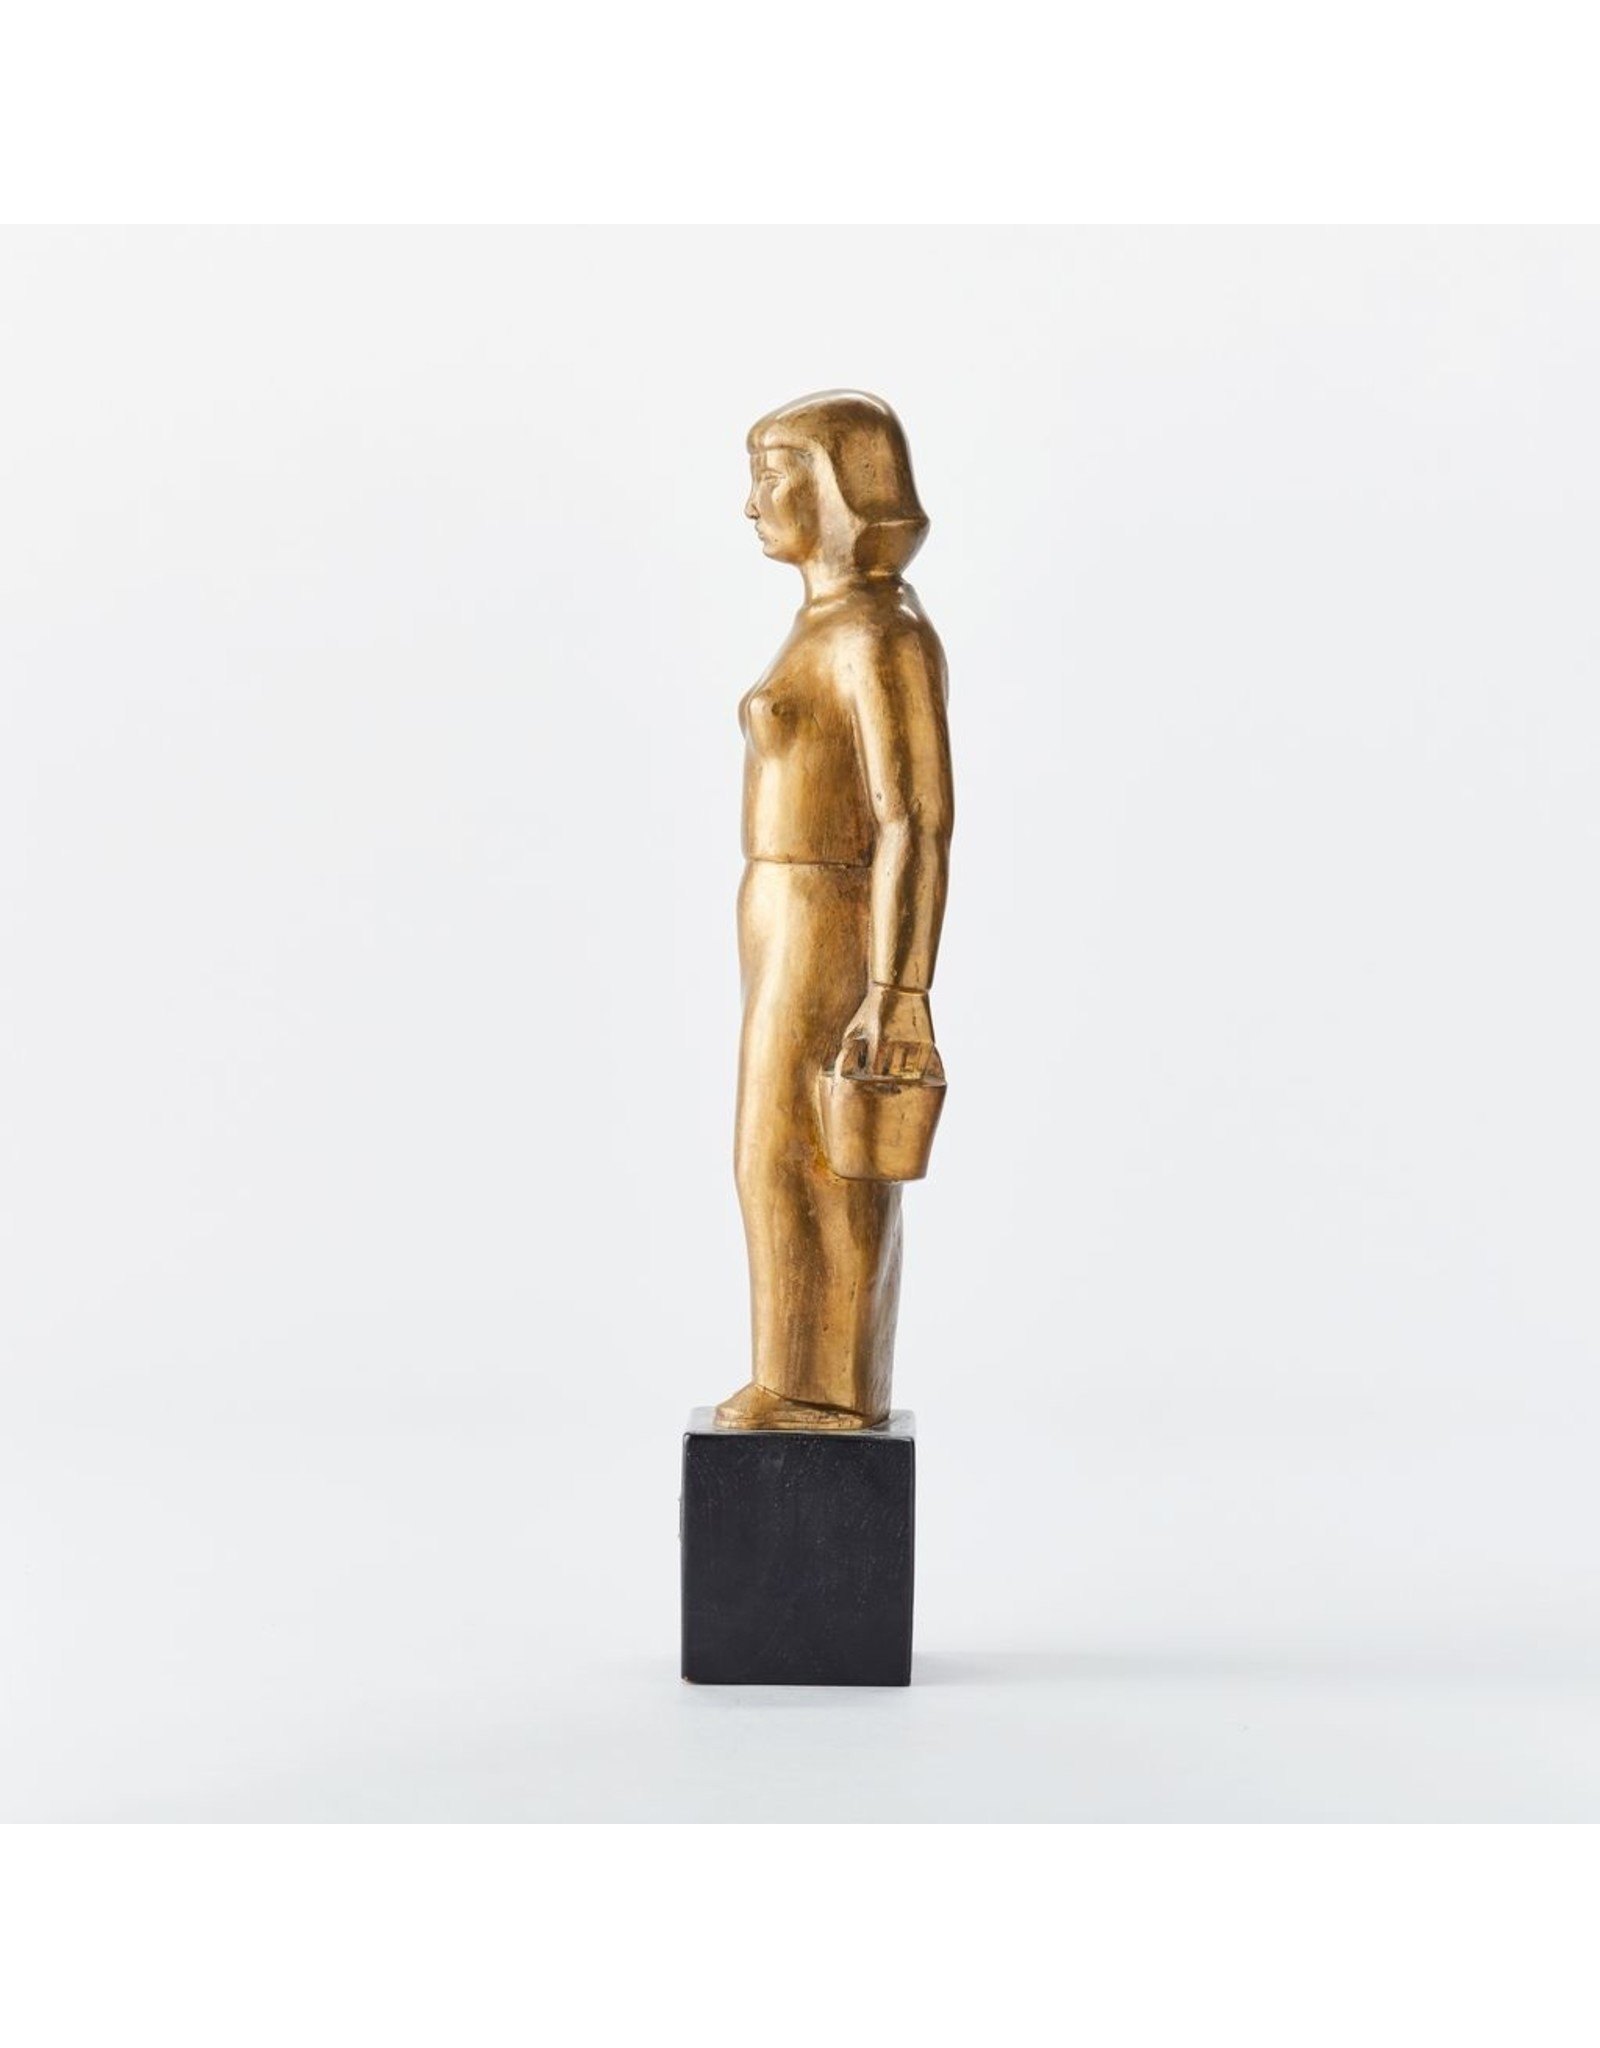 1920s GOLD PLATED BRONZE OF “WOMAN WITH PAIL” ON WOODEN STAND